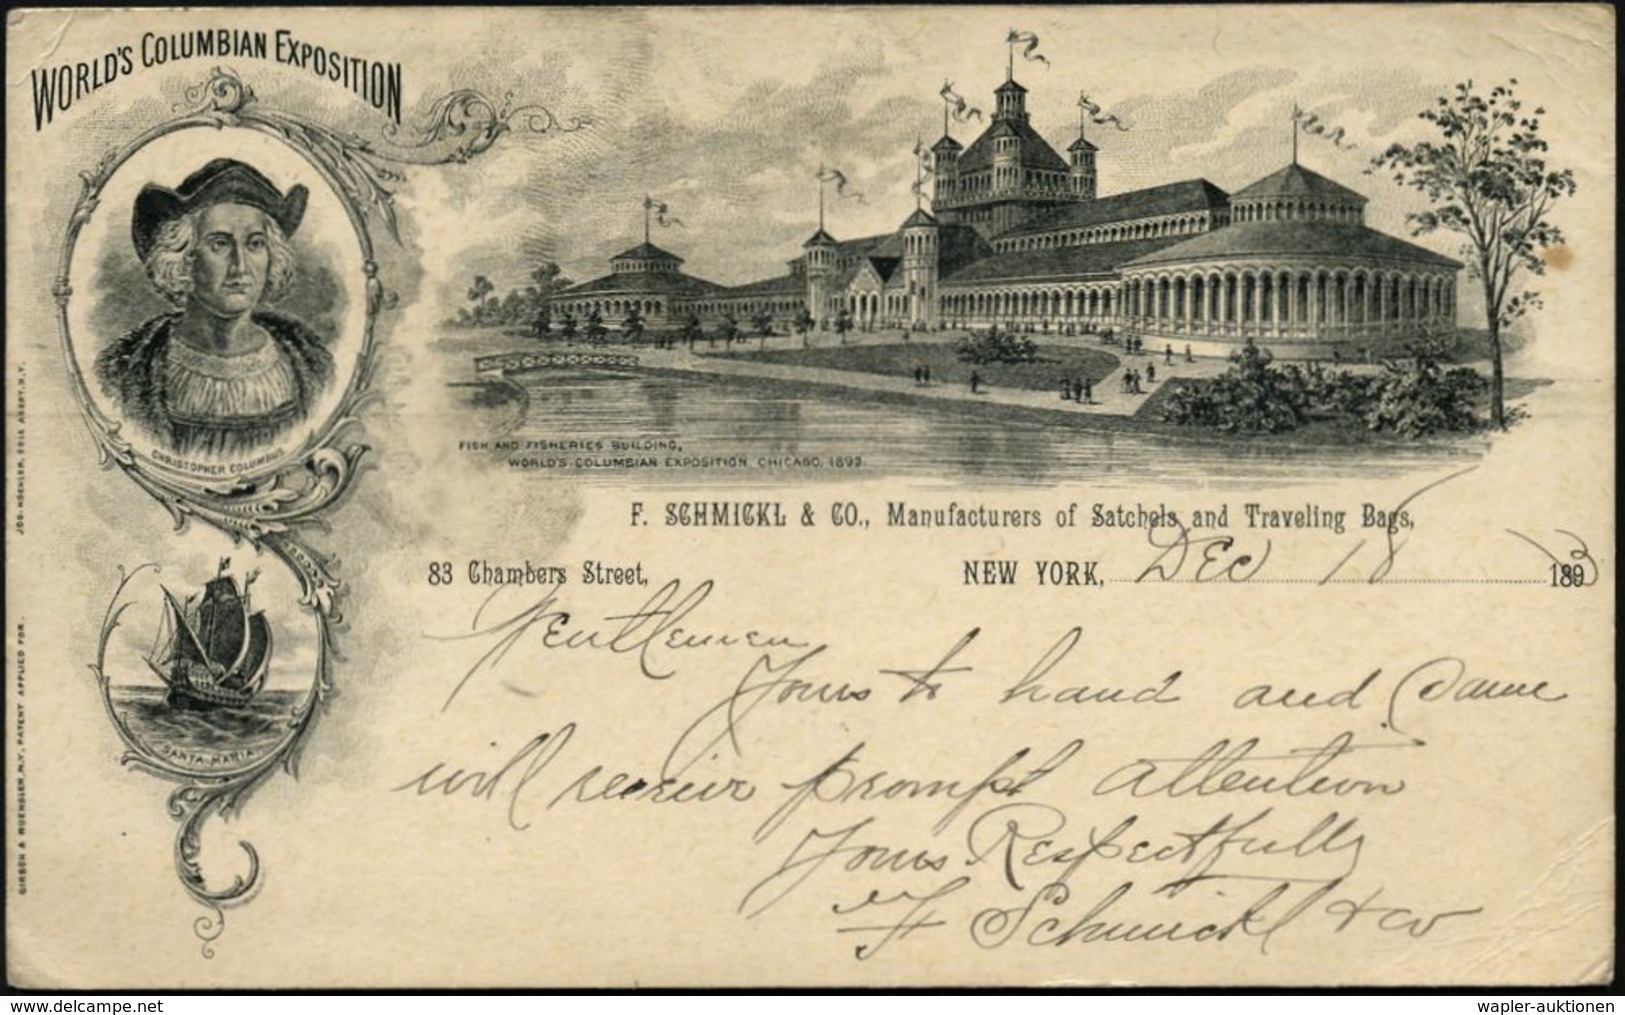 U.S.A. 1893 (18.12.) PP 1 C. Grant, Schw.: WORLD'S COLUMBIAN EXPOSITION, FISH AND FISHERIES BUILDING.. = Chr.Columbus Br - Cristoforo Colombo